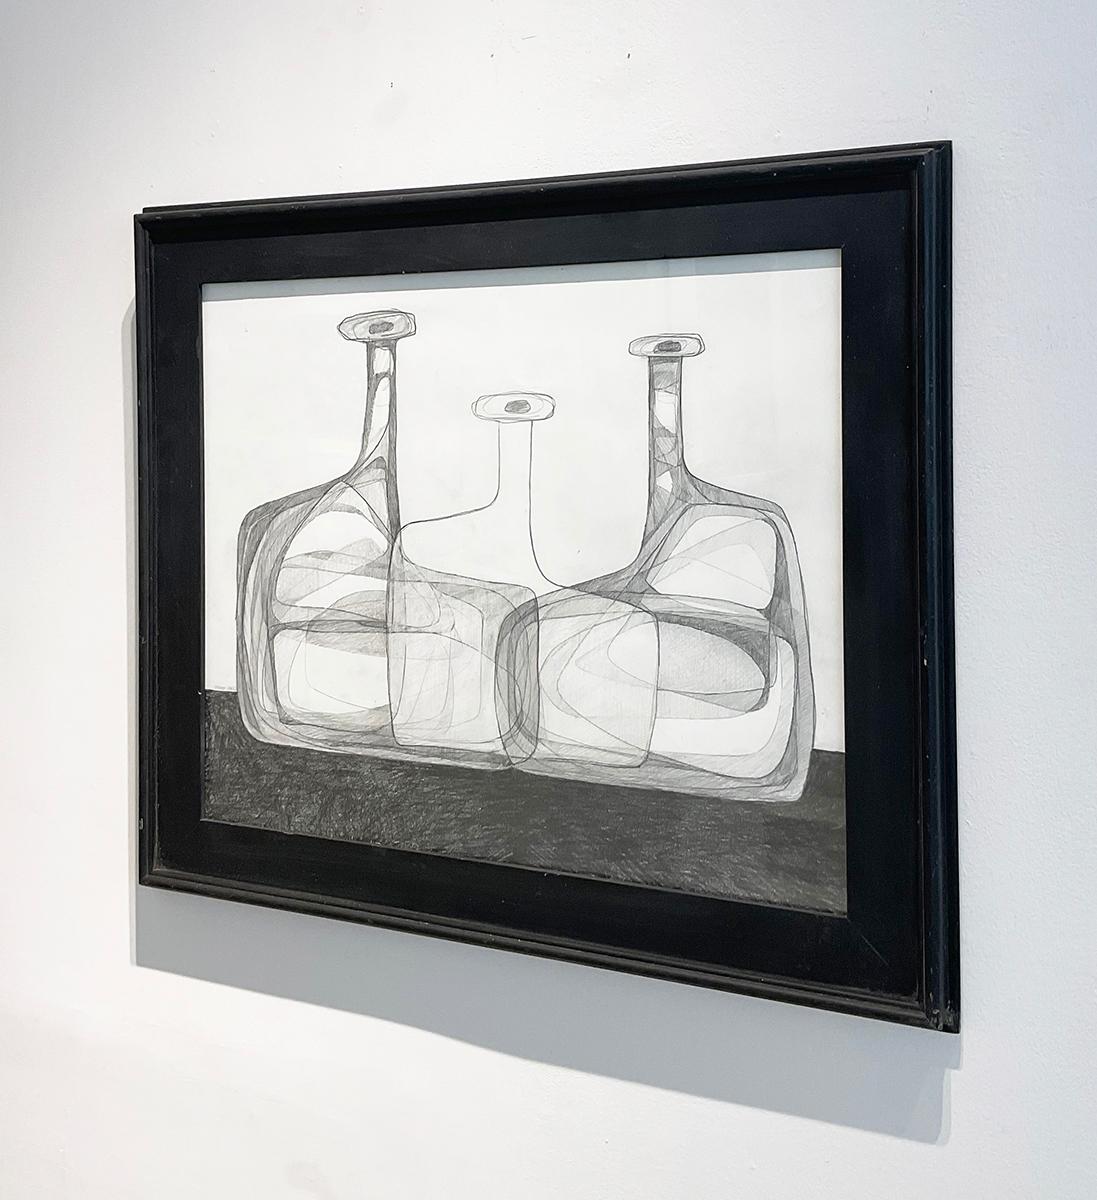 Abstract cubist style still life graphite drawing inspired by Giorgio Morandi's bottle paintings 
“Three Morandi Bottles II” by Hudson Valley artist, David Dew Bruner, made in 2022
Graphite on paper in a vintage black painted wood frame
Sight